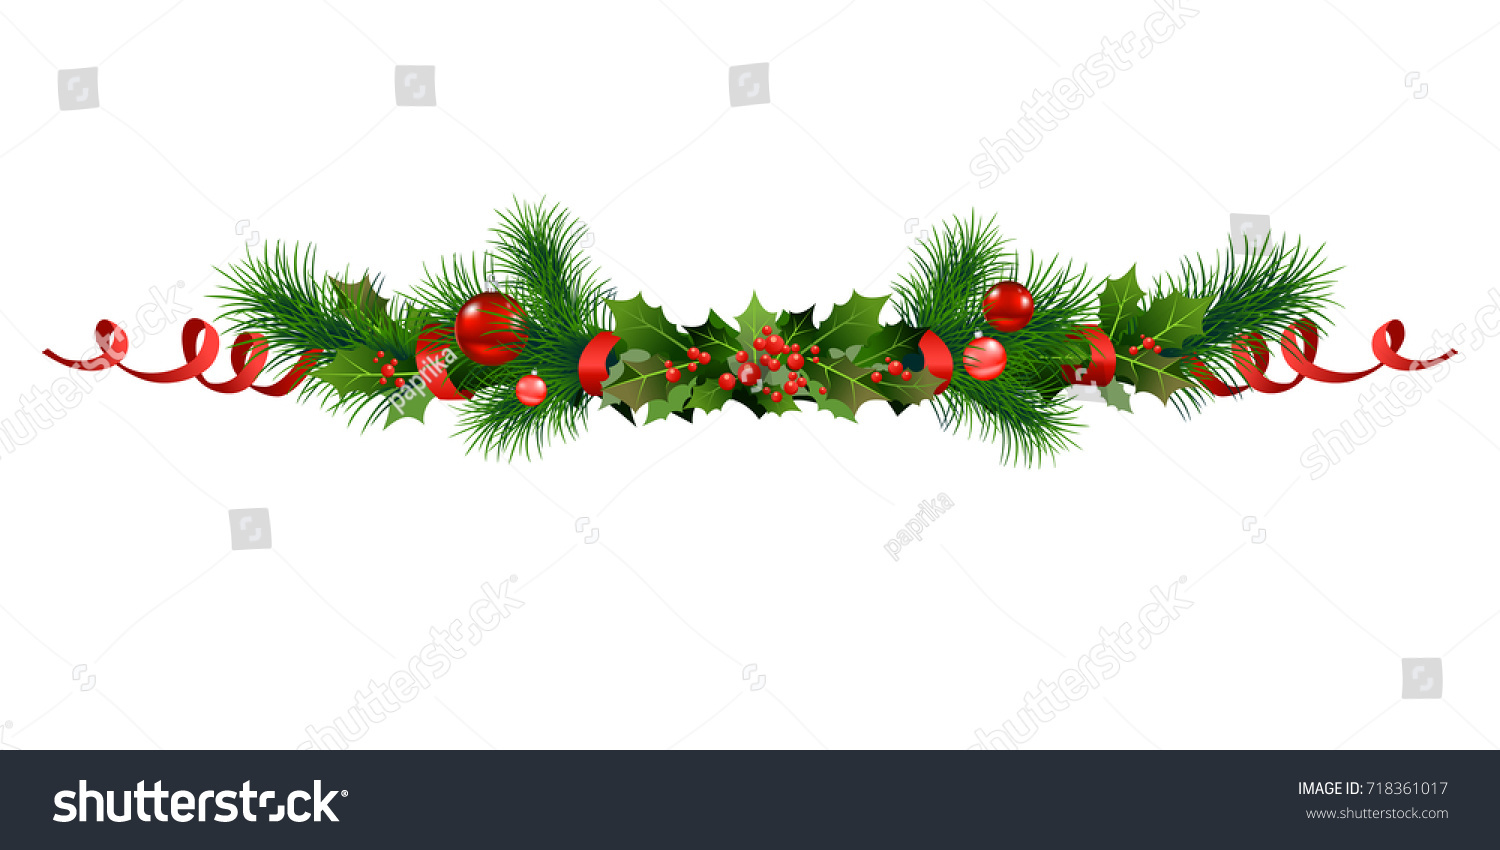 Christmas festive poinsettia and christmas tree decor. Holiday image for design banner, ticket, invitation or card, leaflet and so on. #718361017